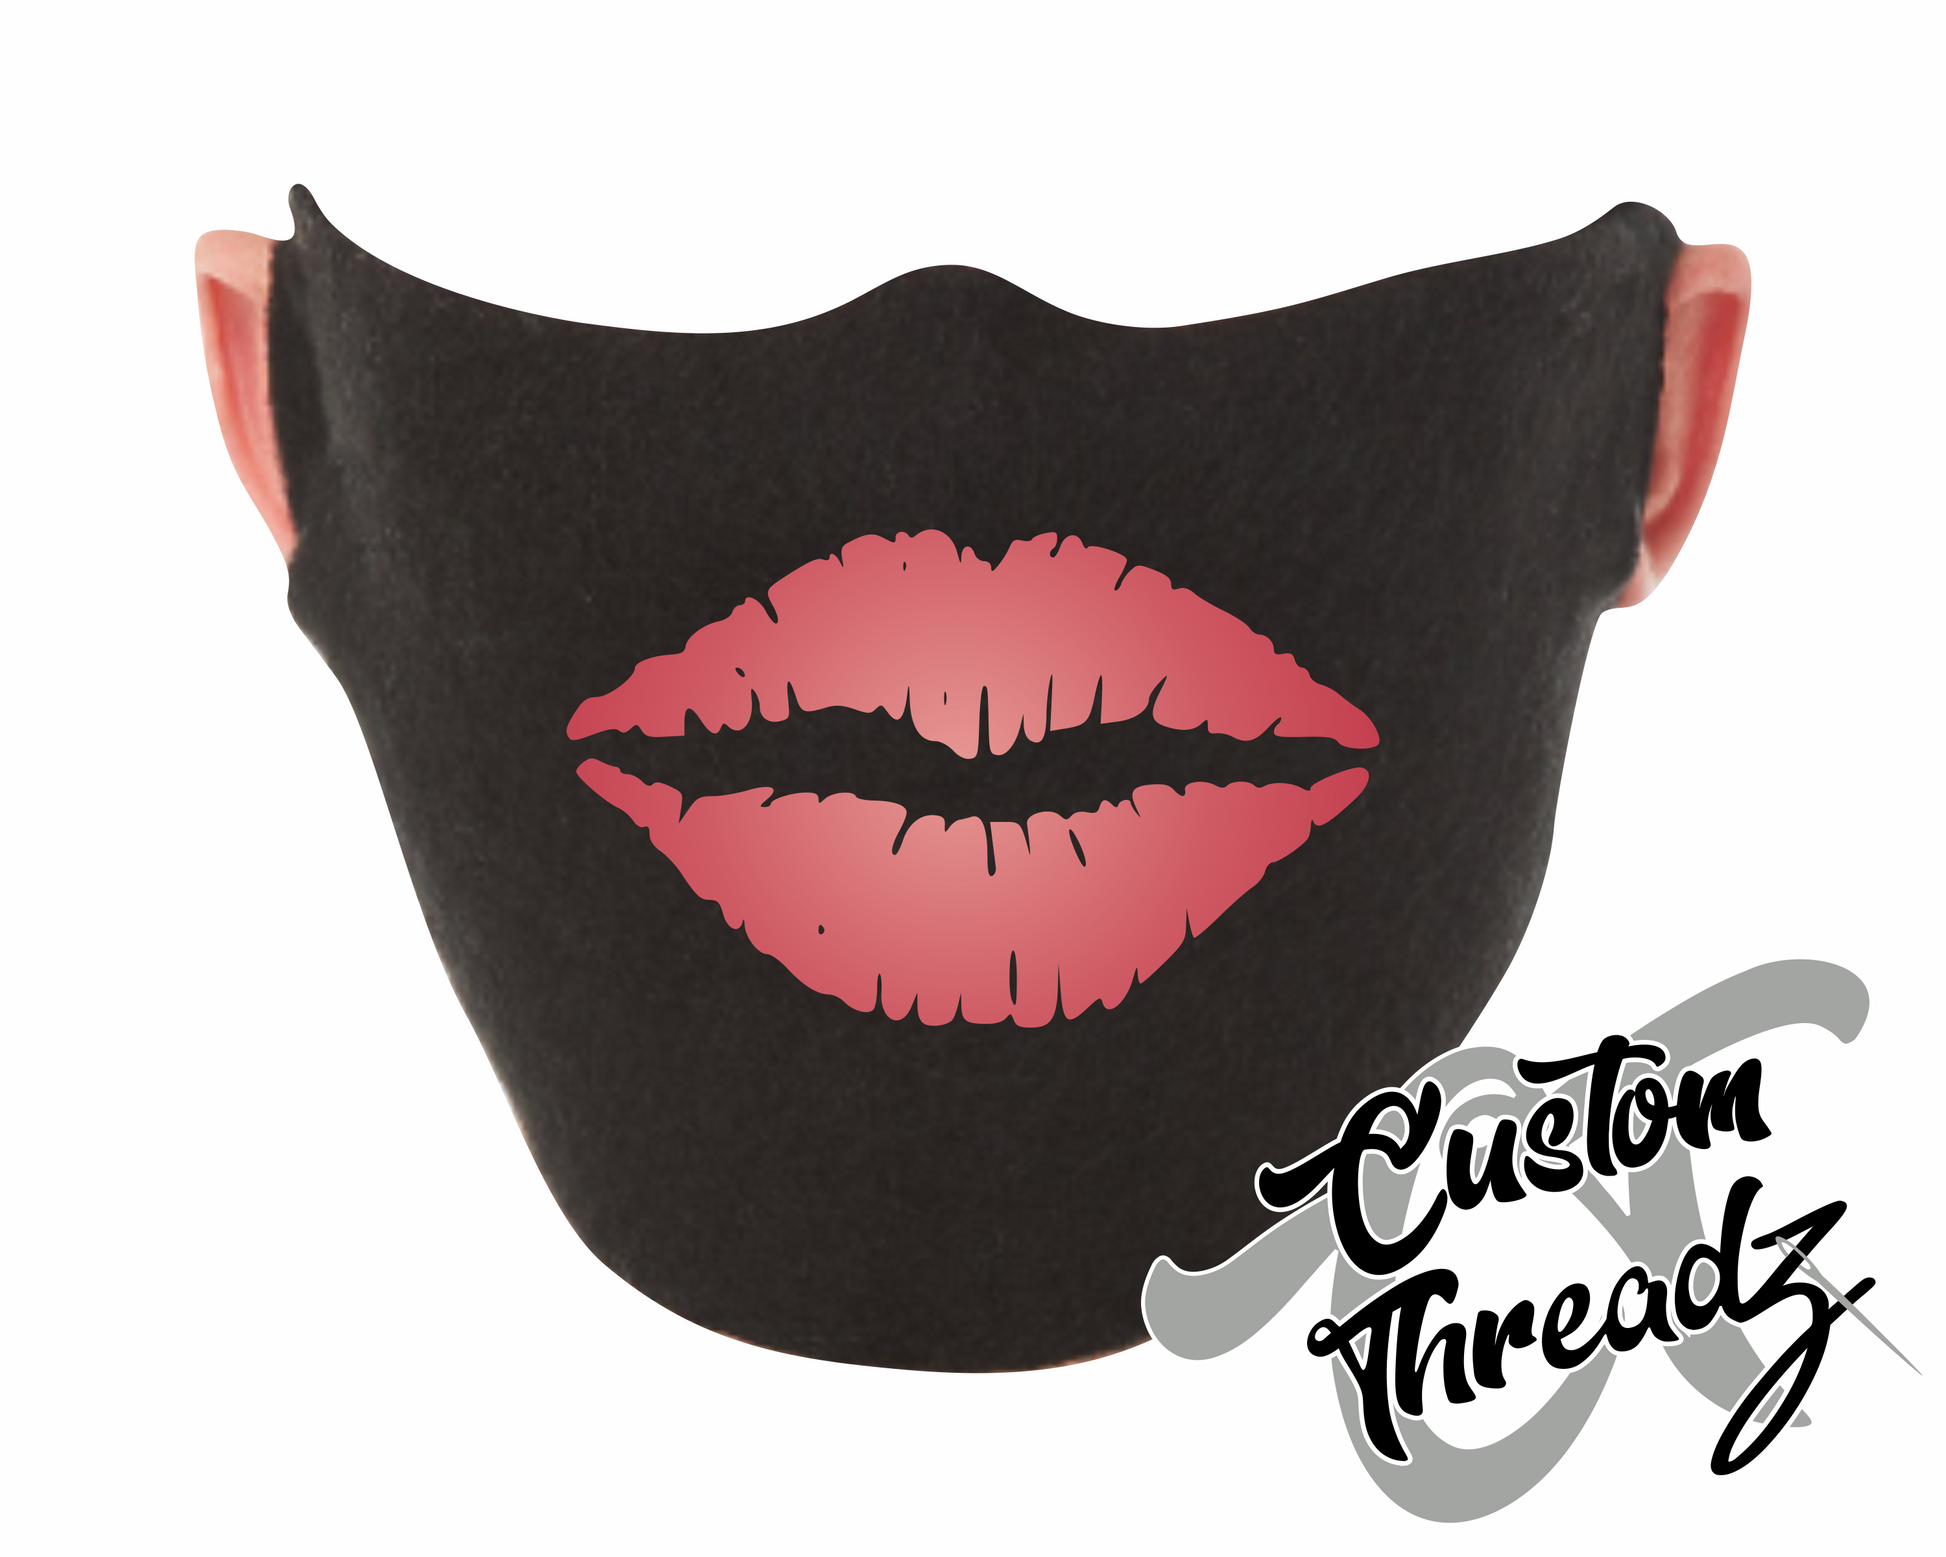 black face mask with red lips DTG printed design